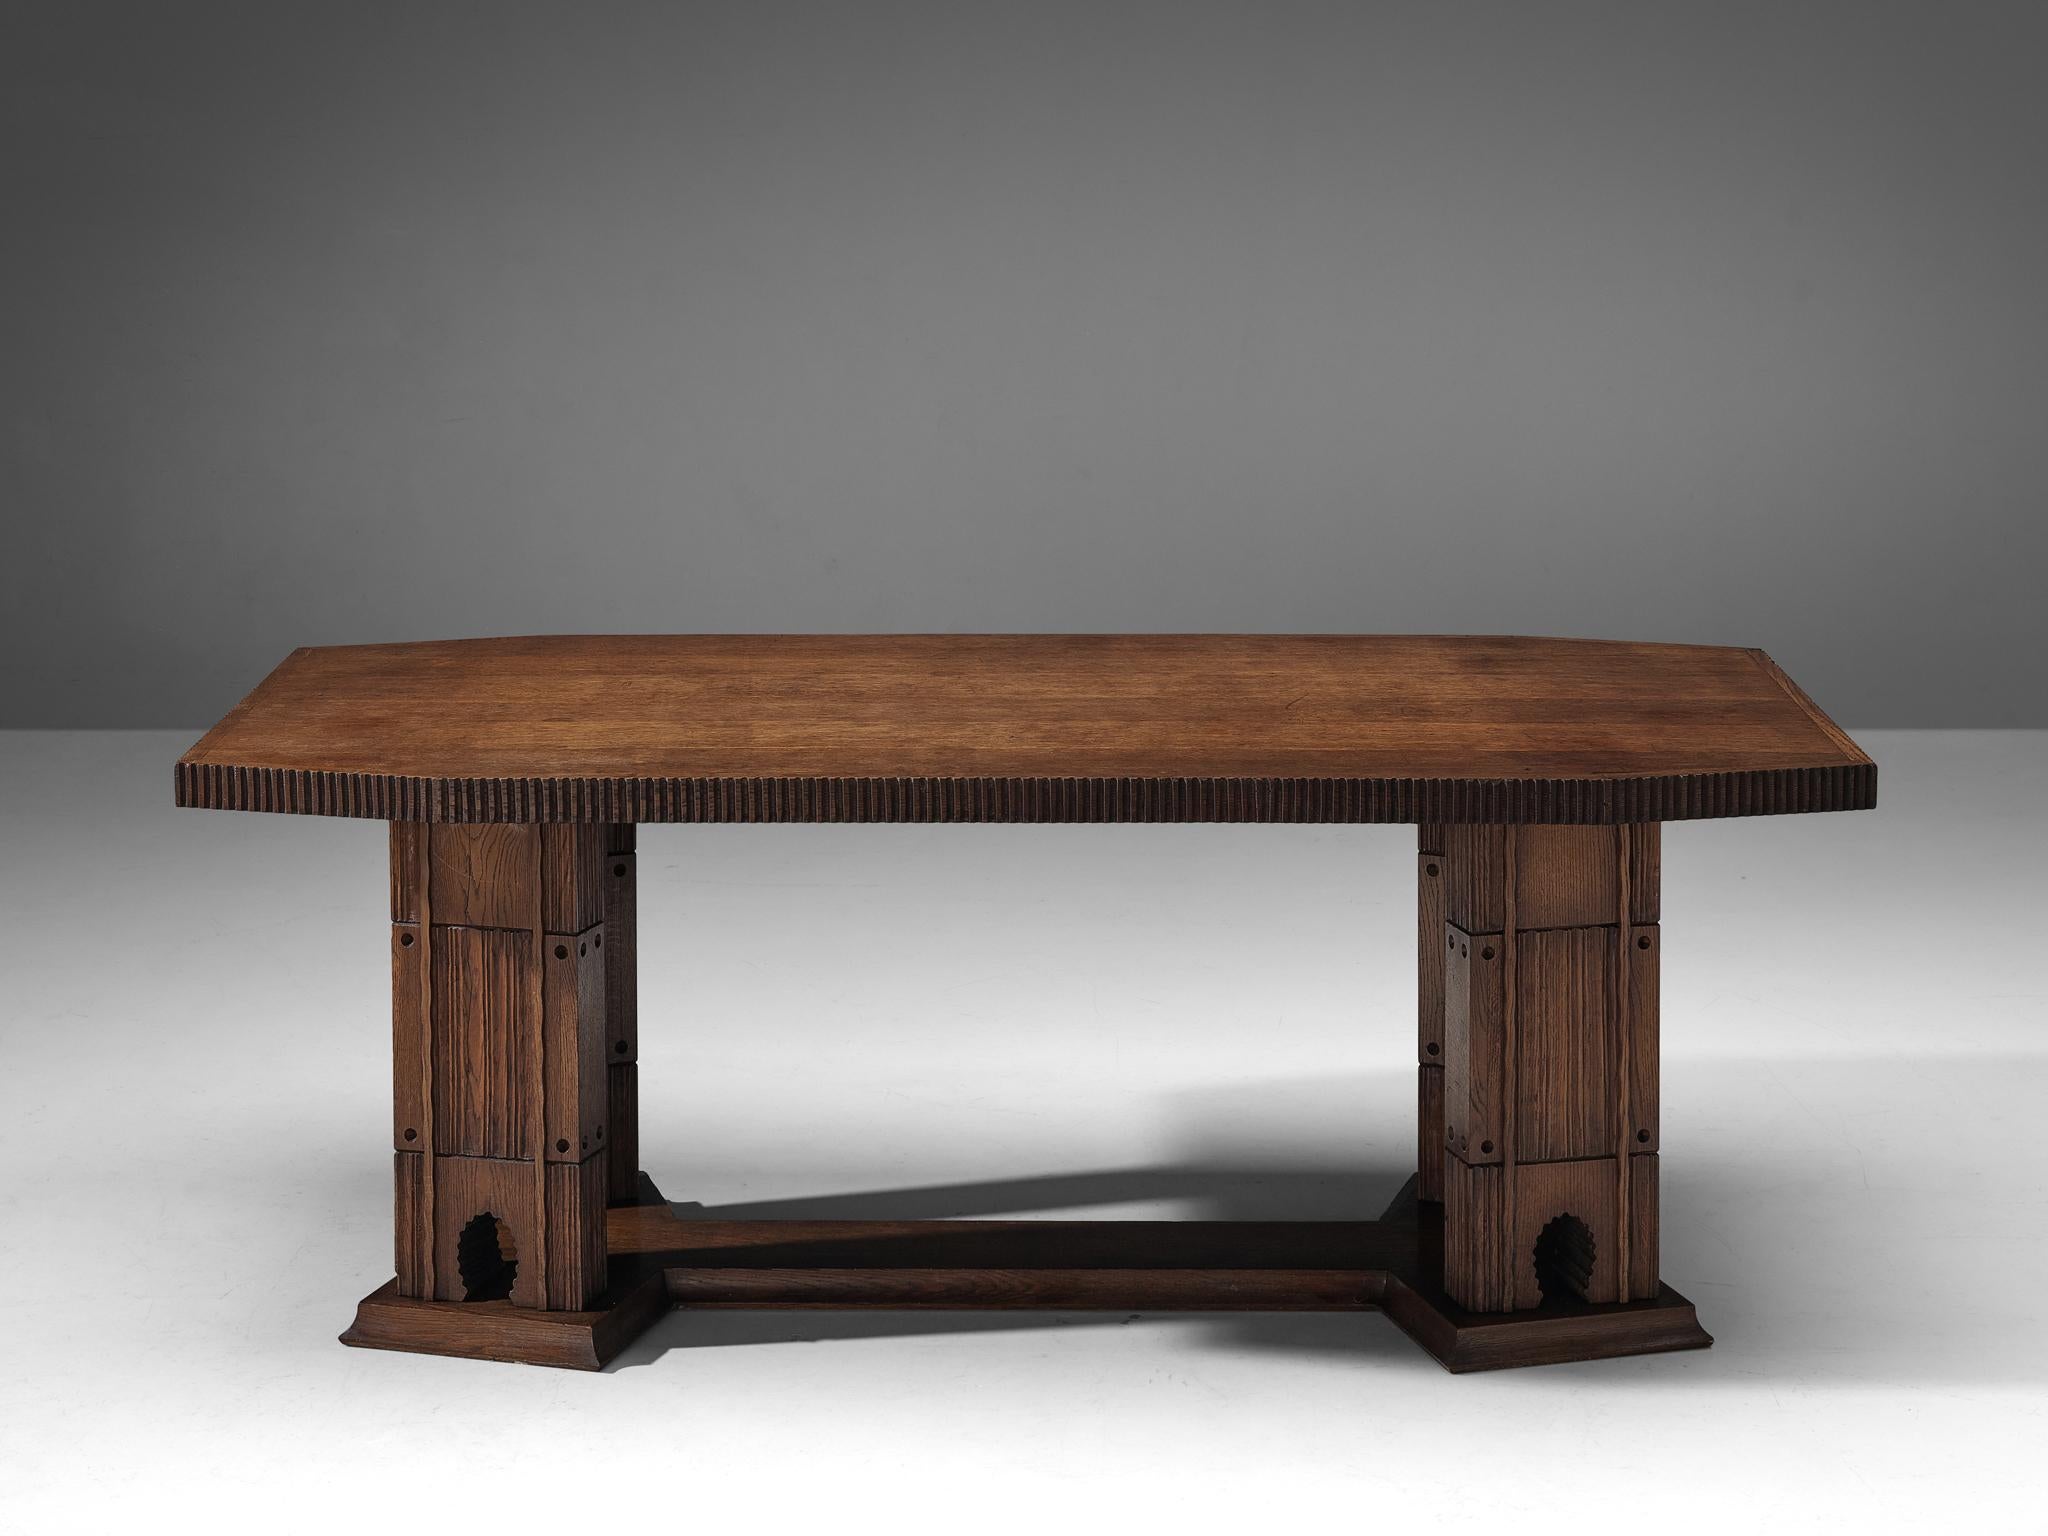 Ernesto Valabrega, dining table, oak, Italy, circa 1935

Sculptural dining table, designed by Ernesto Valabrega for his company Mobilart, circa 1935. This dining table shows all characteristics of a true Ernesto Valabrega design. The rustic design